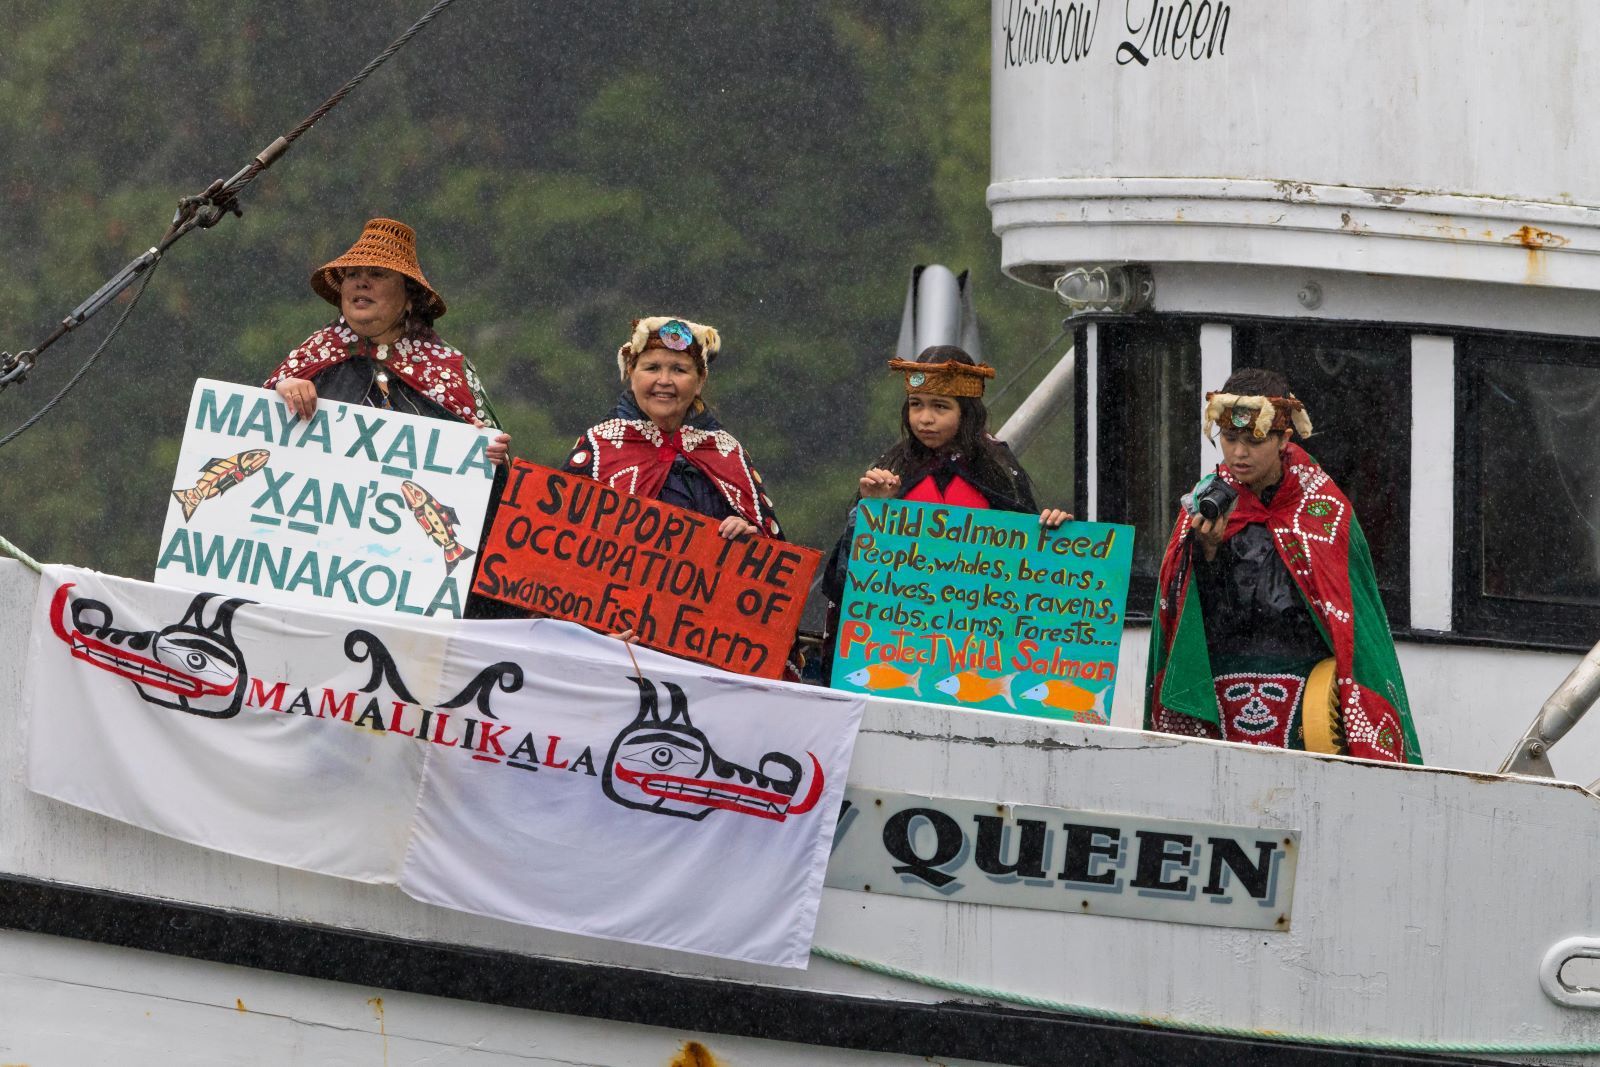 A group of Indigenous people, two older and two younger, dress in traditional garb and hold signs that carry messages including 'I support the occupation of Swanson Fish Farm.' One of them is looking into a small camera.